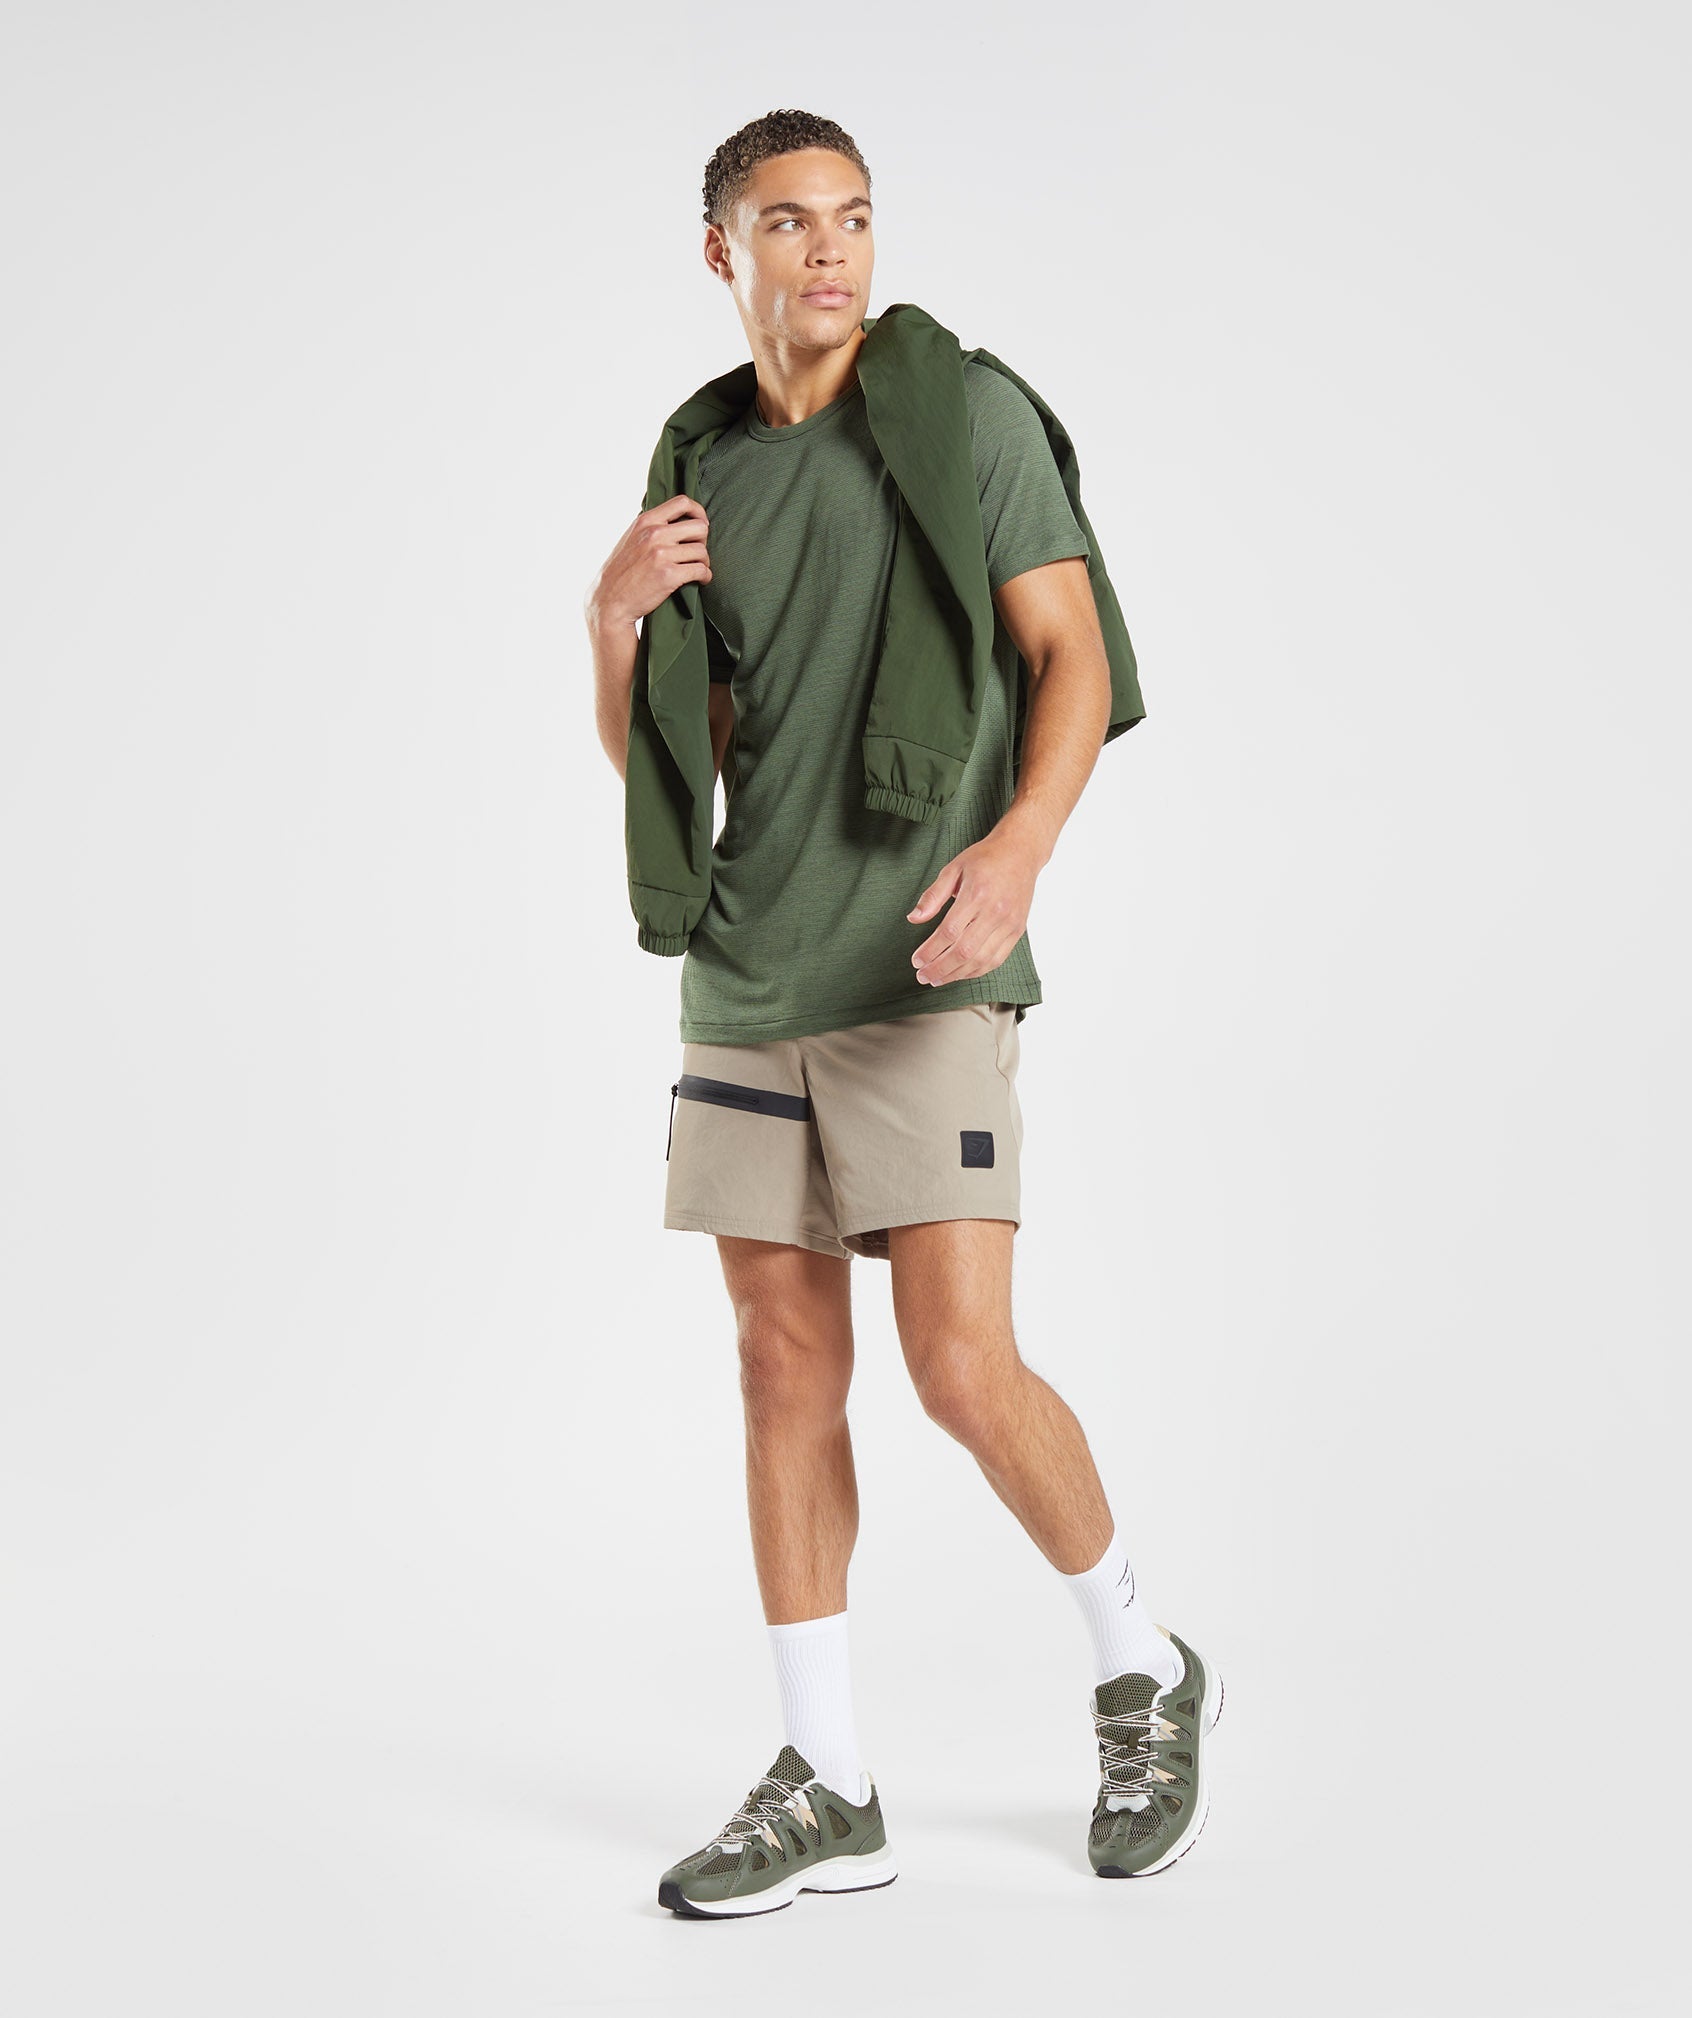 Retake Woven 7" Shorts in Cement Brown - view 4